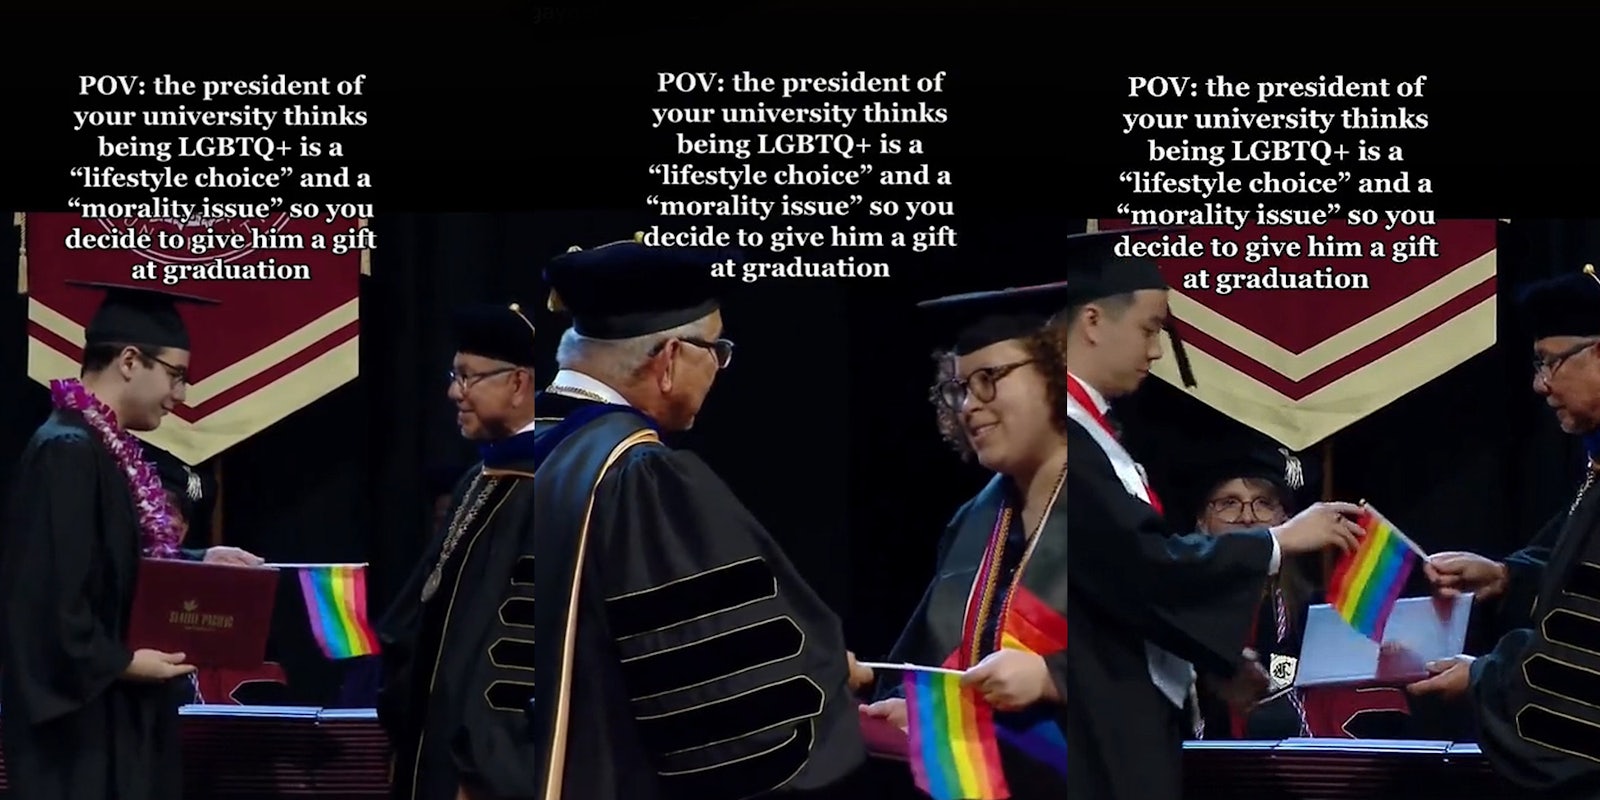 Student in cap and gown handing president of university small pride flag caption 'POV: the president of your university thinks being LGBTQ+ is a 'lifestyle choice' and a 'morality issue' so you decide to give him a gift at graduation' (l) Student handing president of university small pride flag caption 'POV: the president of your university thinks being LGBTQ+ is a 'lifestyle choice' and a 'morality issue' so you decide to give him a gift at graduation' (c) student handing president of university small pride flag caption 'POV: the president of your university thinks being LGBTQ+ is a 'lifestyle choice' and a 'morality issue' so you decide to give him a gift at graduation' (r)